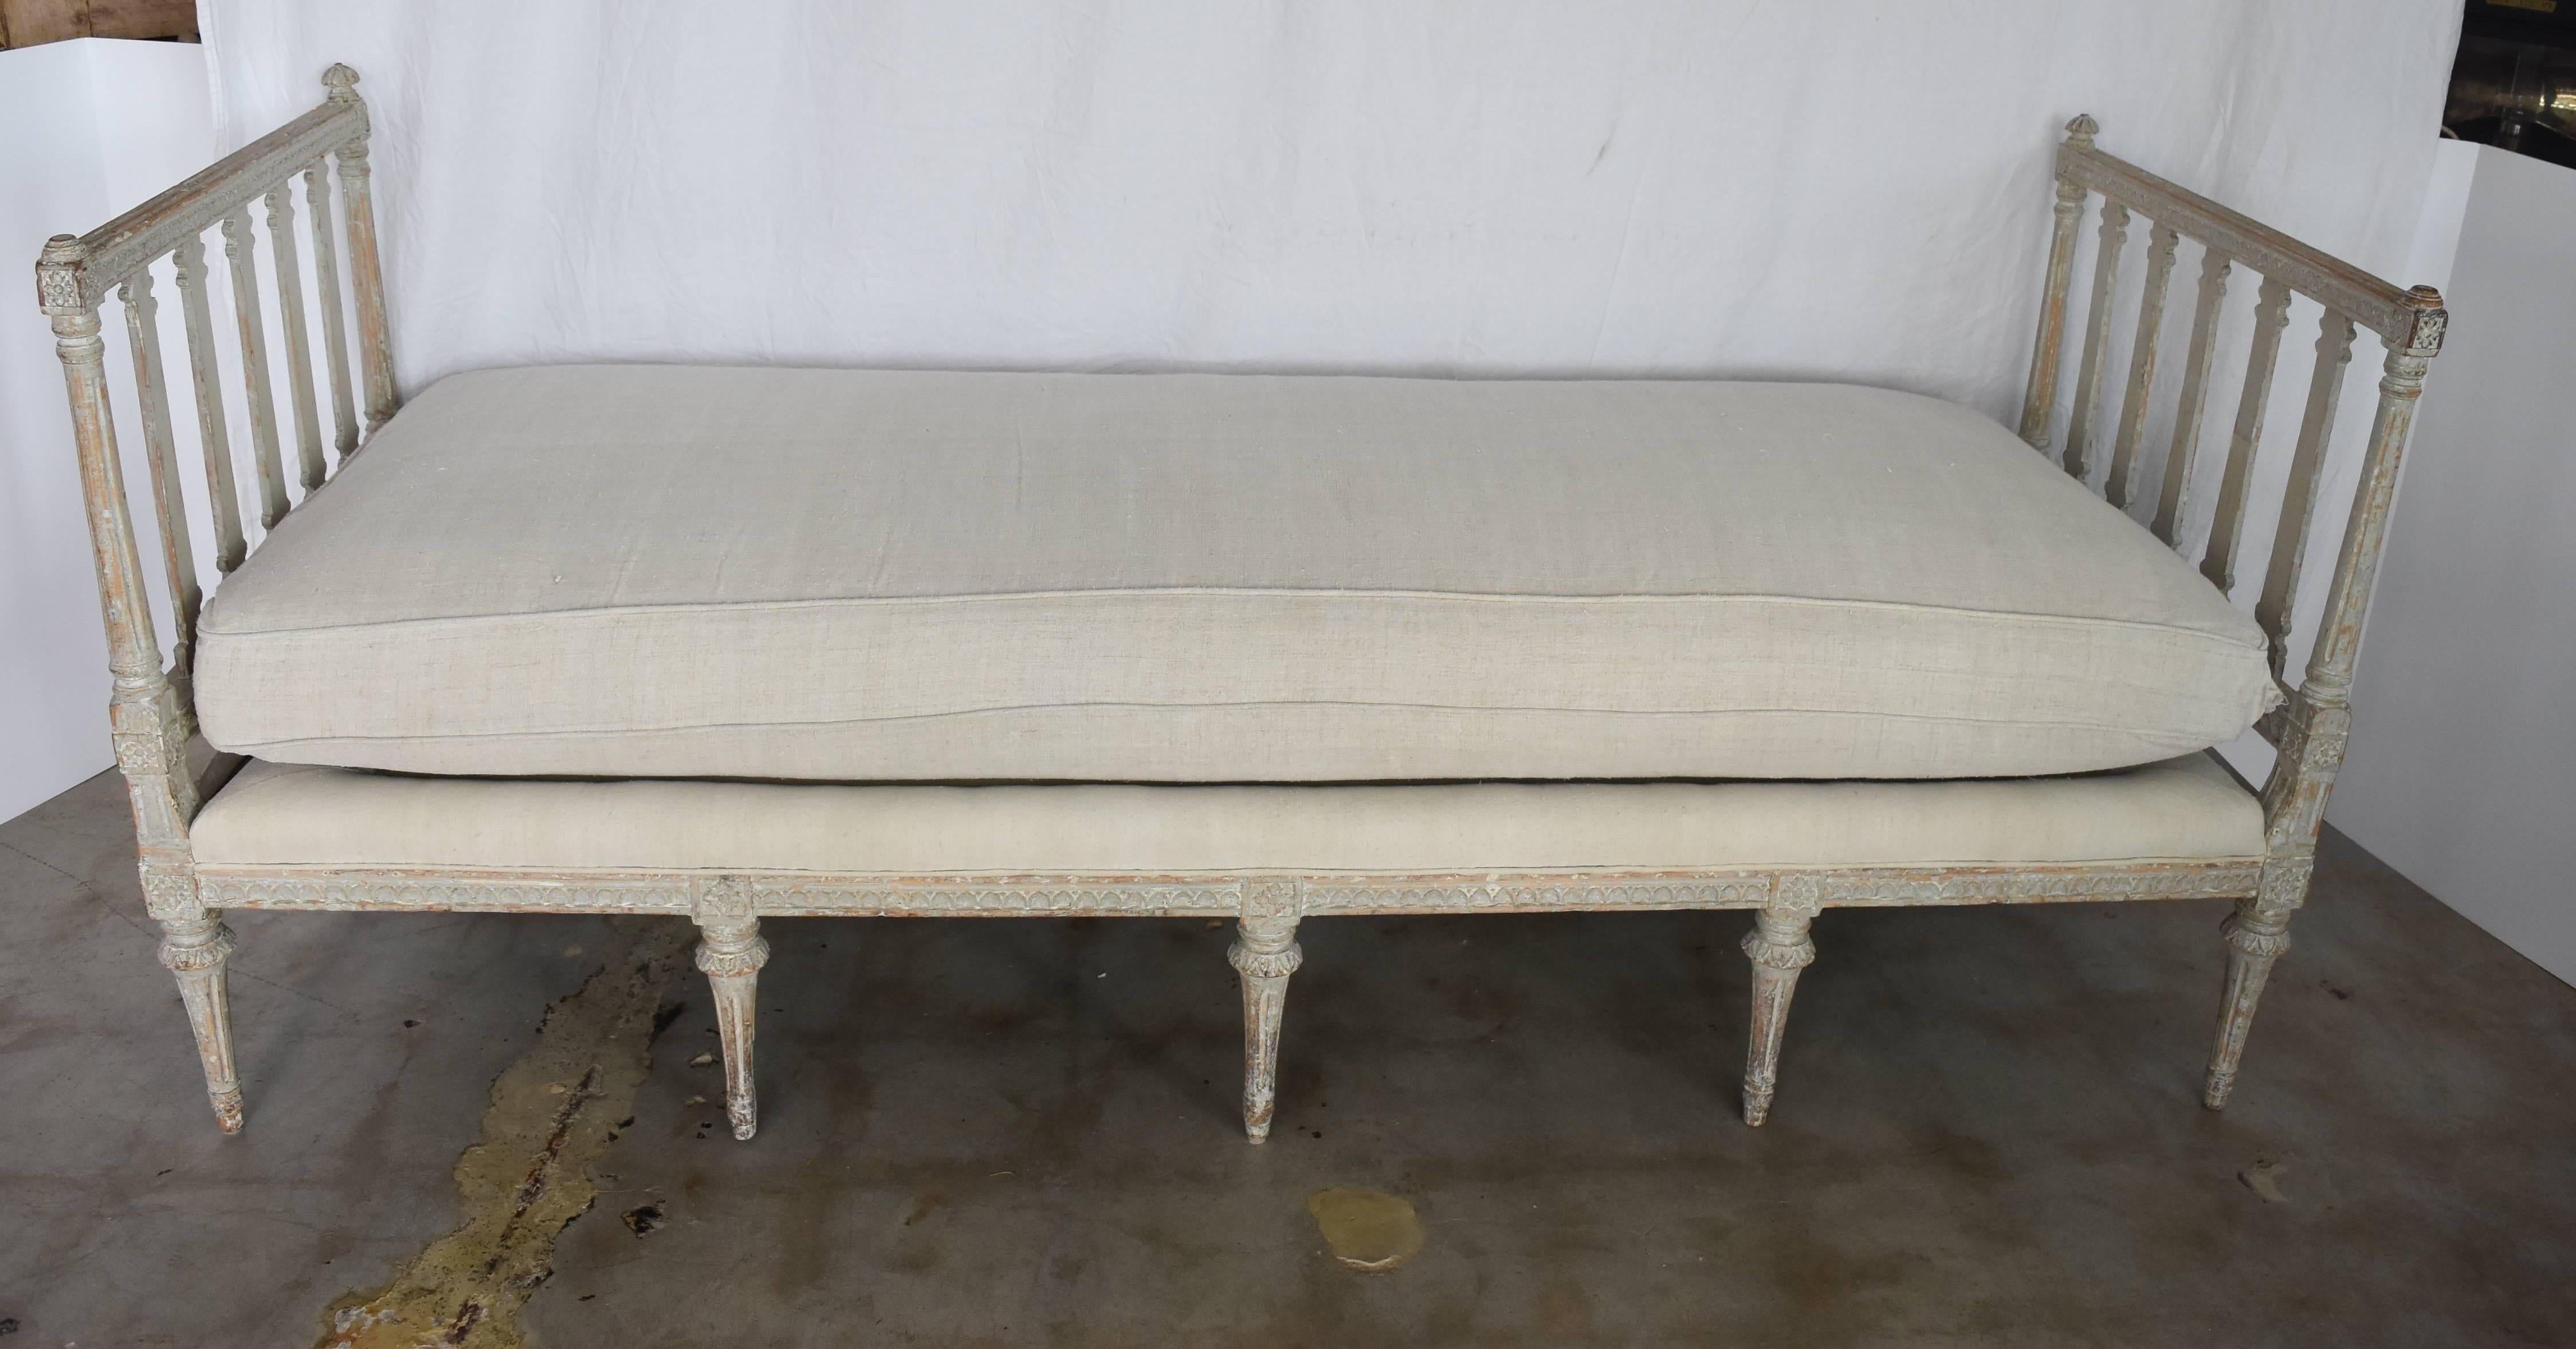 19th century Swedish Gustavian bench stamped and signed on bottom and beautiful grayish white paint.
Since photo, the cushion has been upholstered in vintage Hungarian linen.
New photos coming soon.